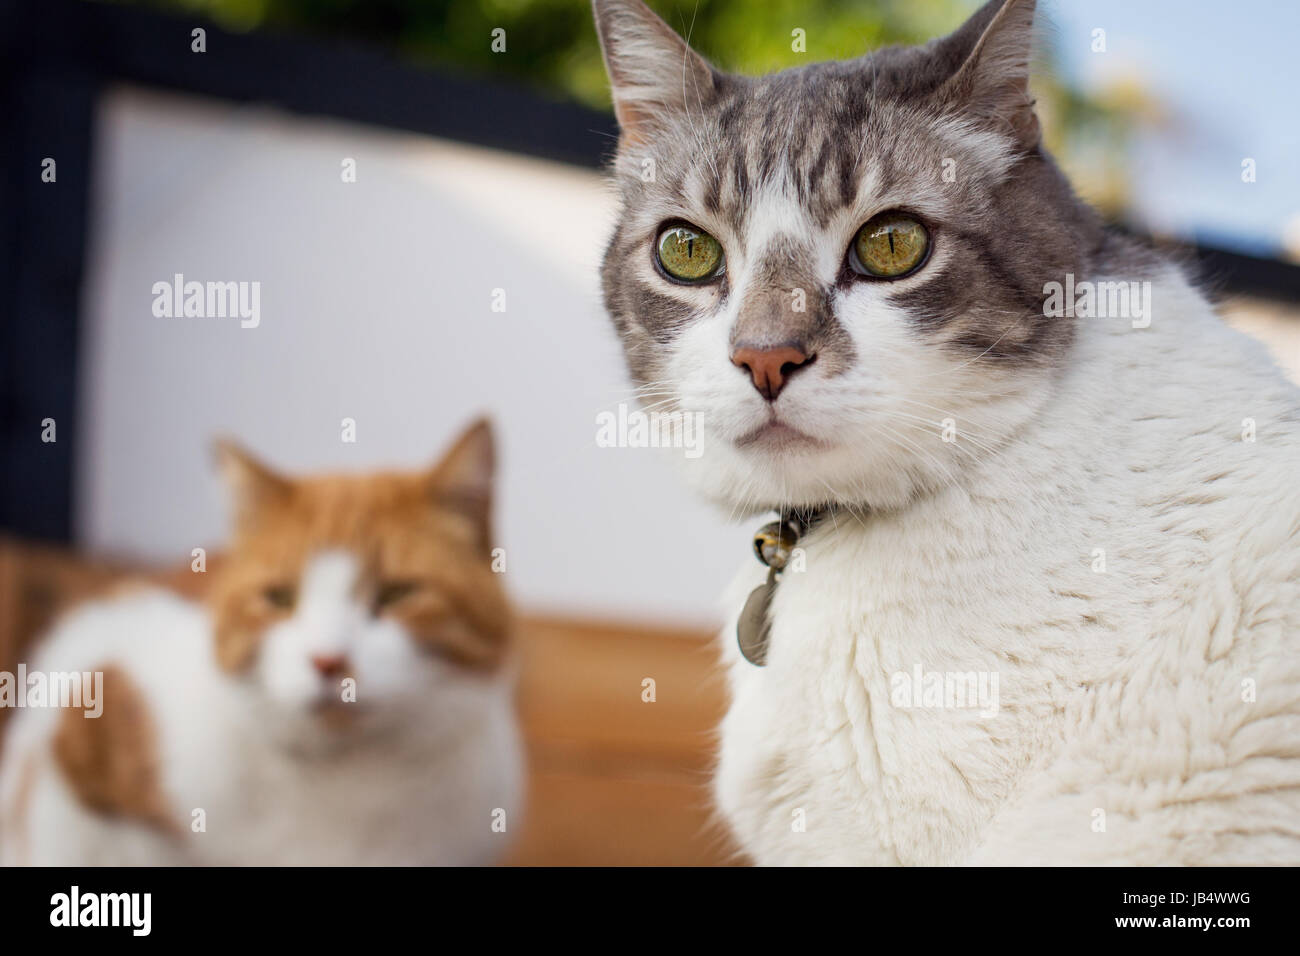 Close-up of white and grey cat turning to look at camera with an orange cat in background. Stock Photo